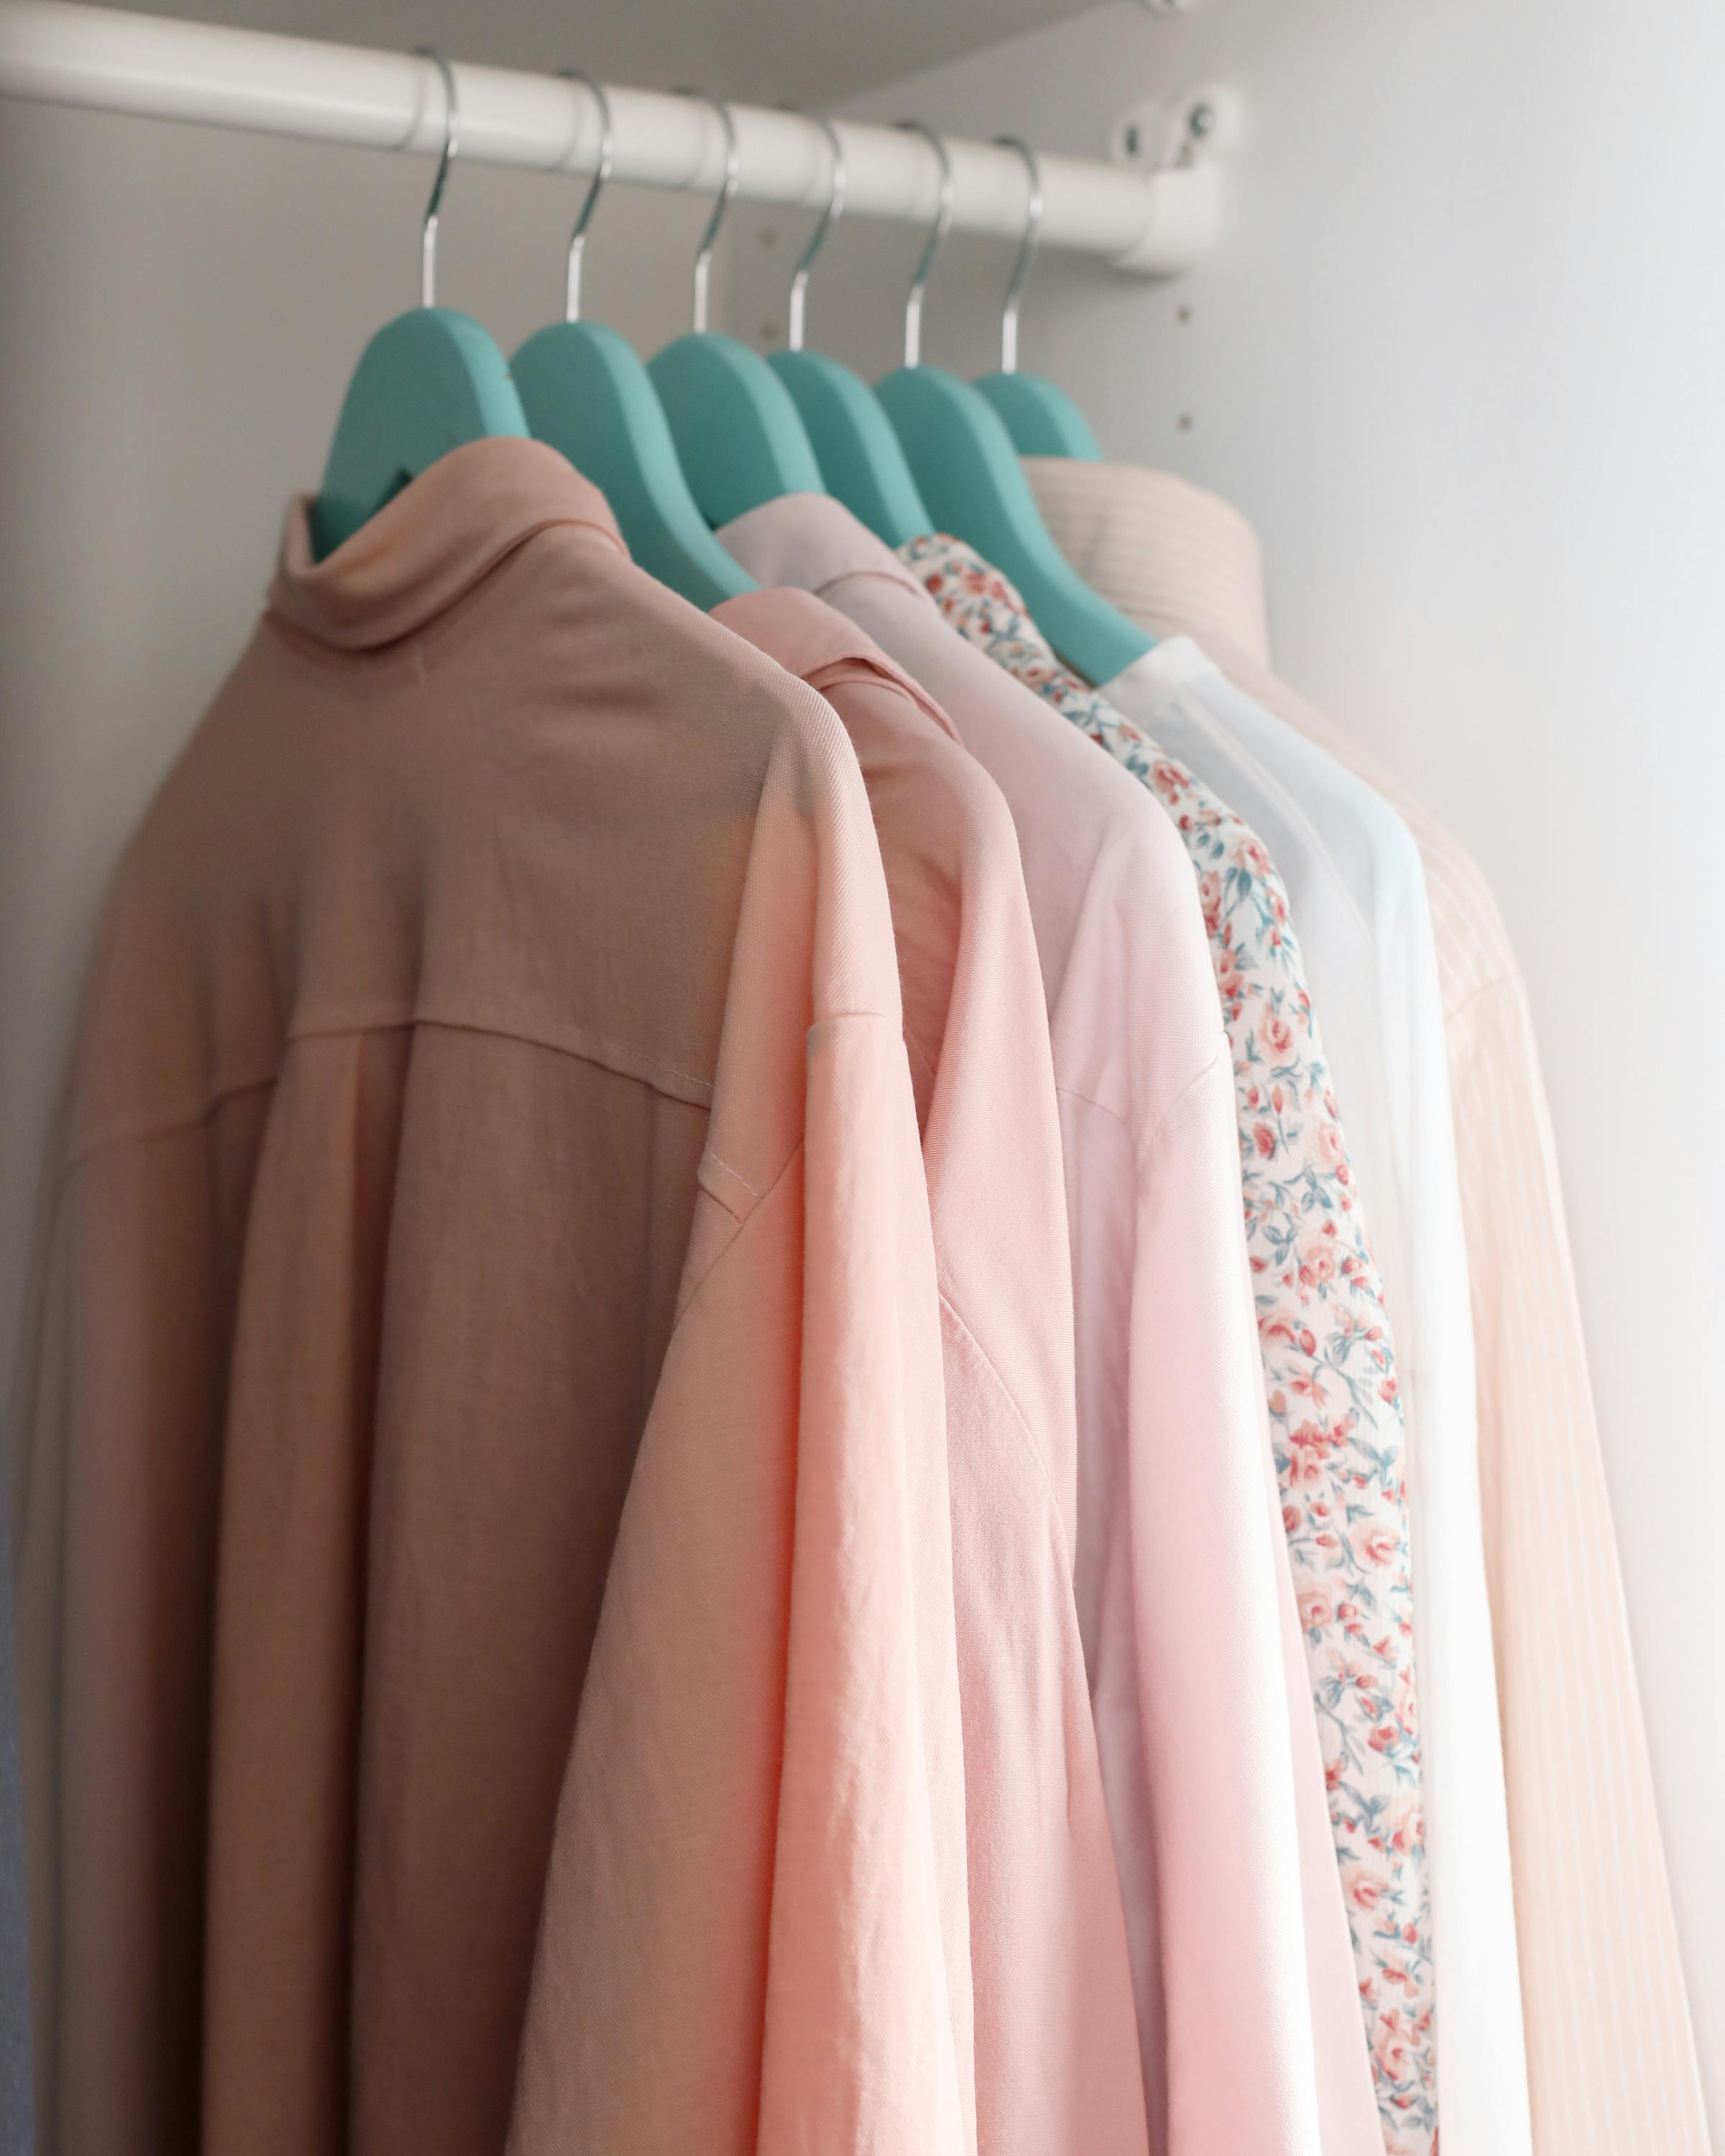 Collection of shirts hanging on racks in closet at home \u00b7 Free Stock Photo